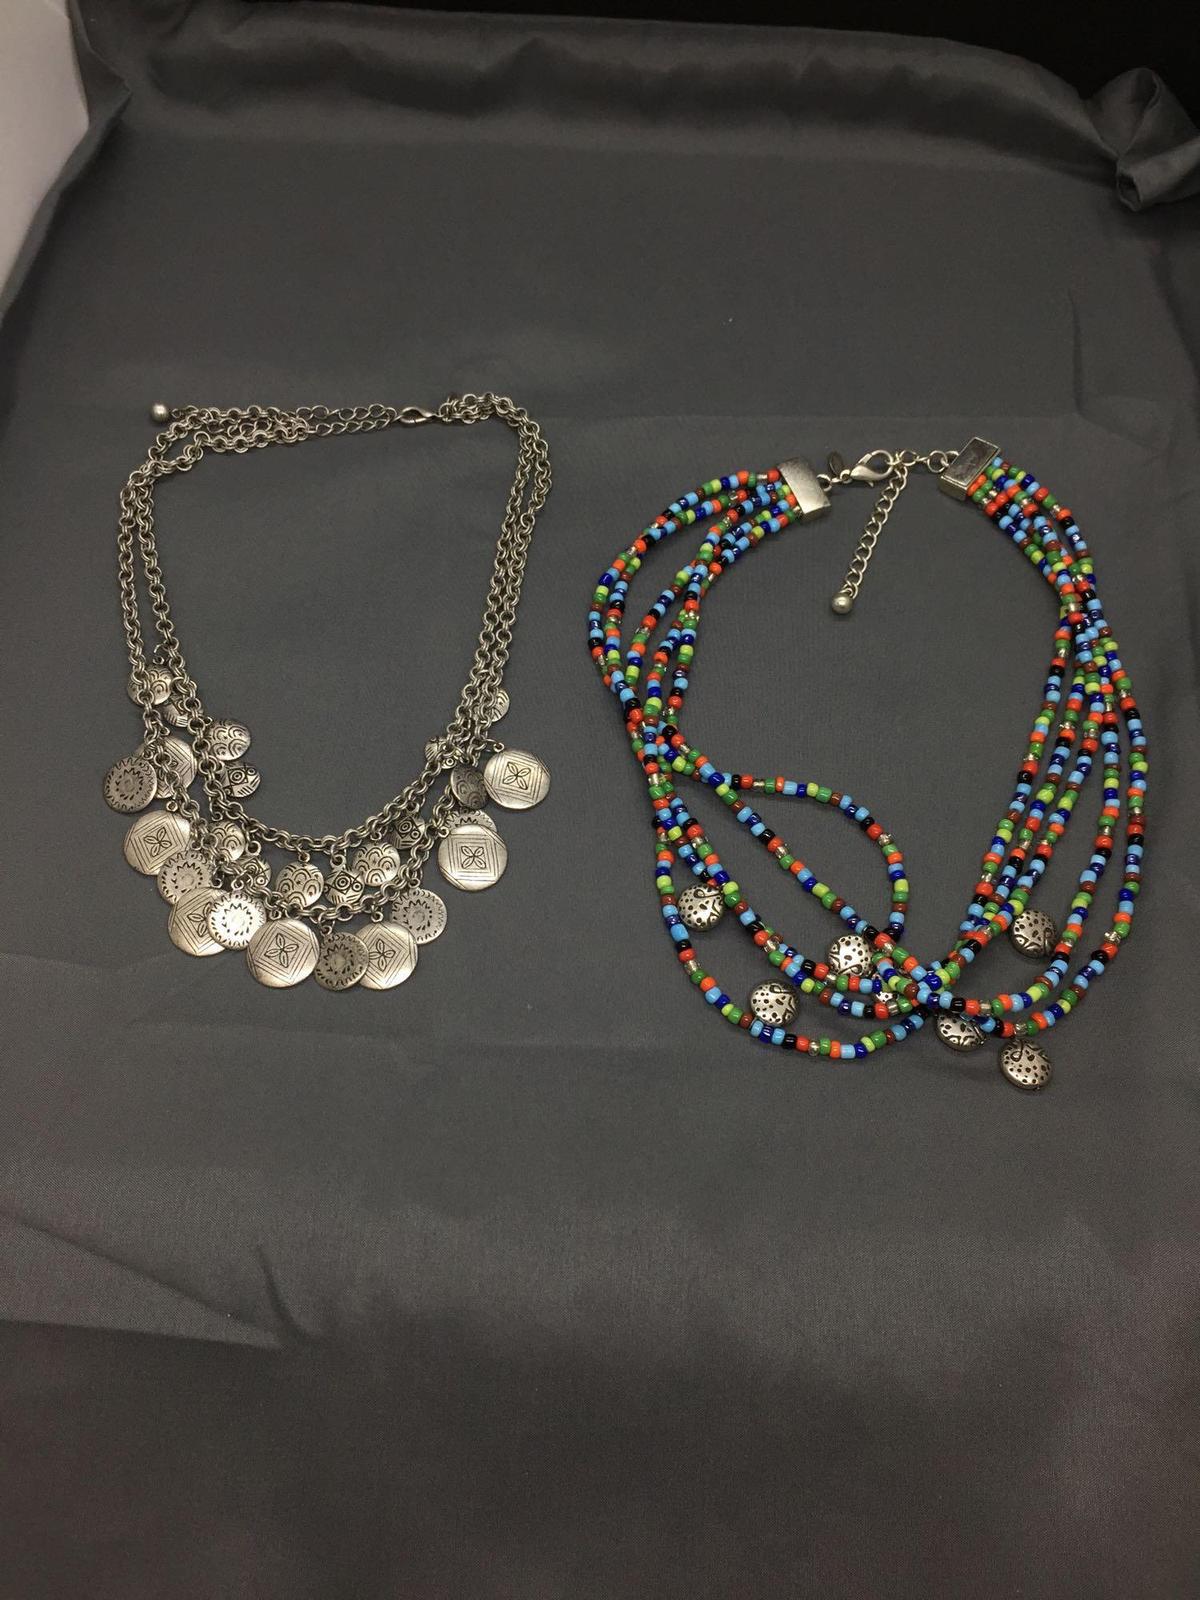 Lot of Two Chicos Designer Fashion Necklaces, One Multi-Strand & Various Colored Beaded 20in